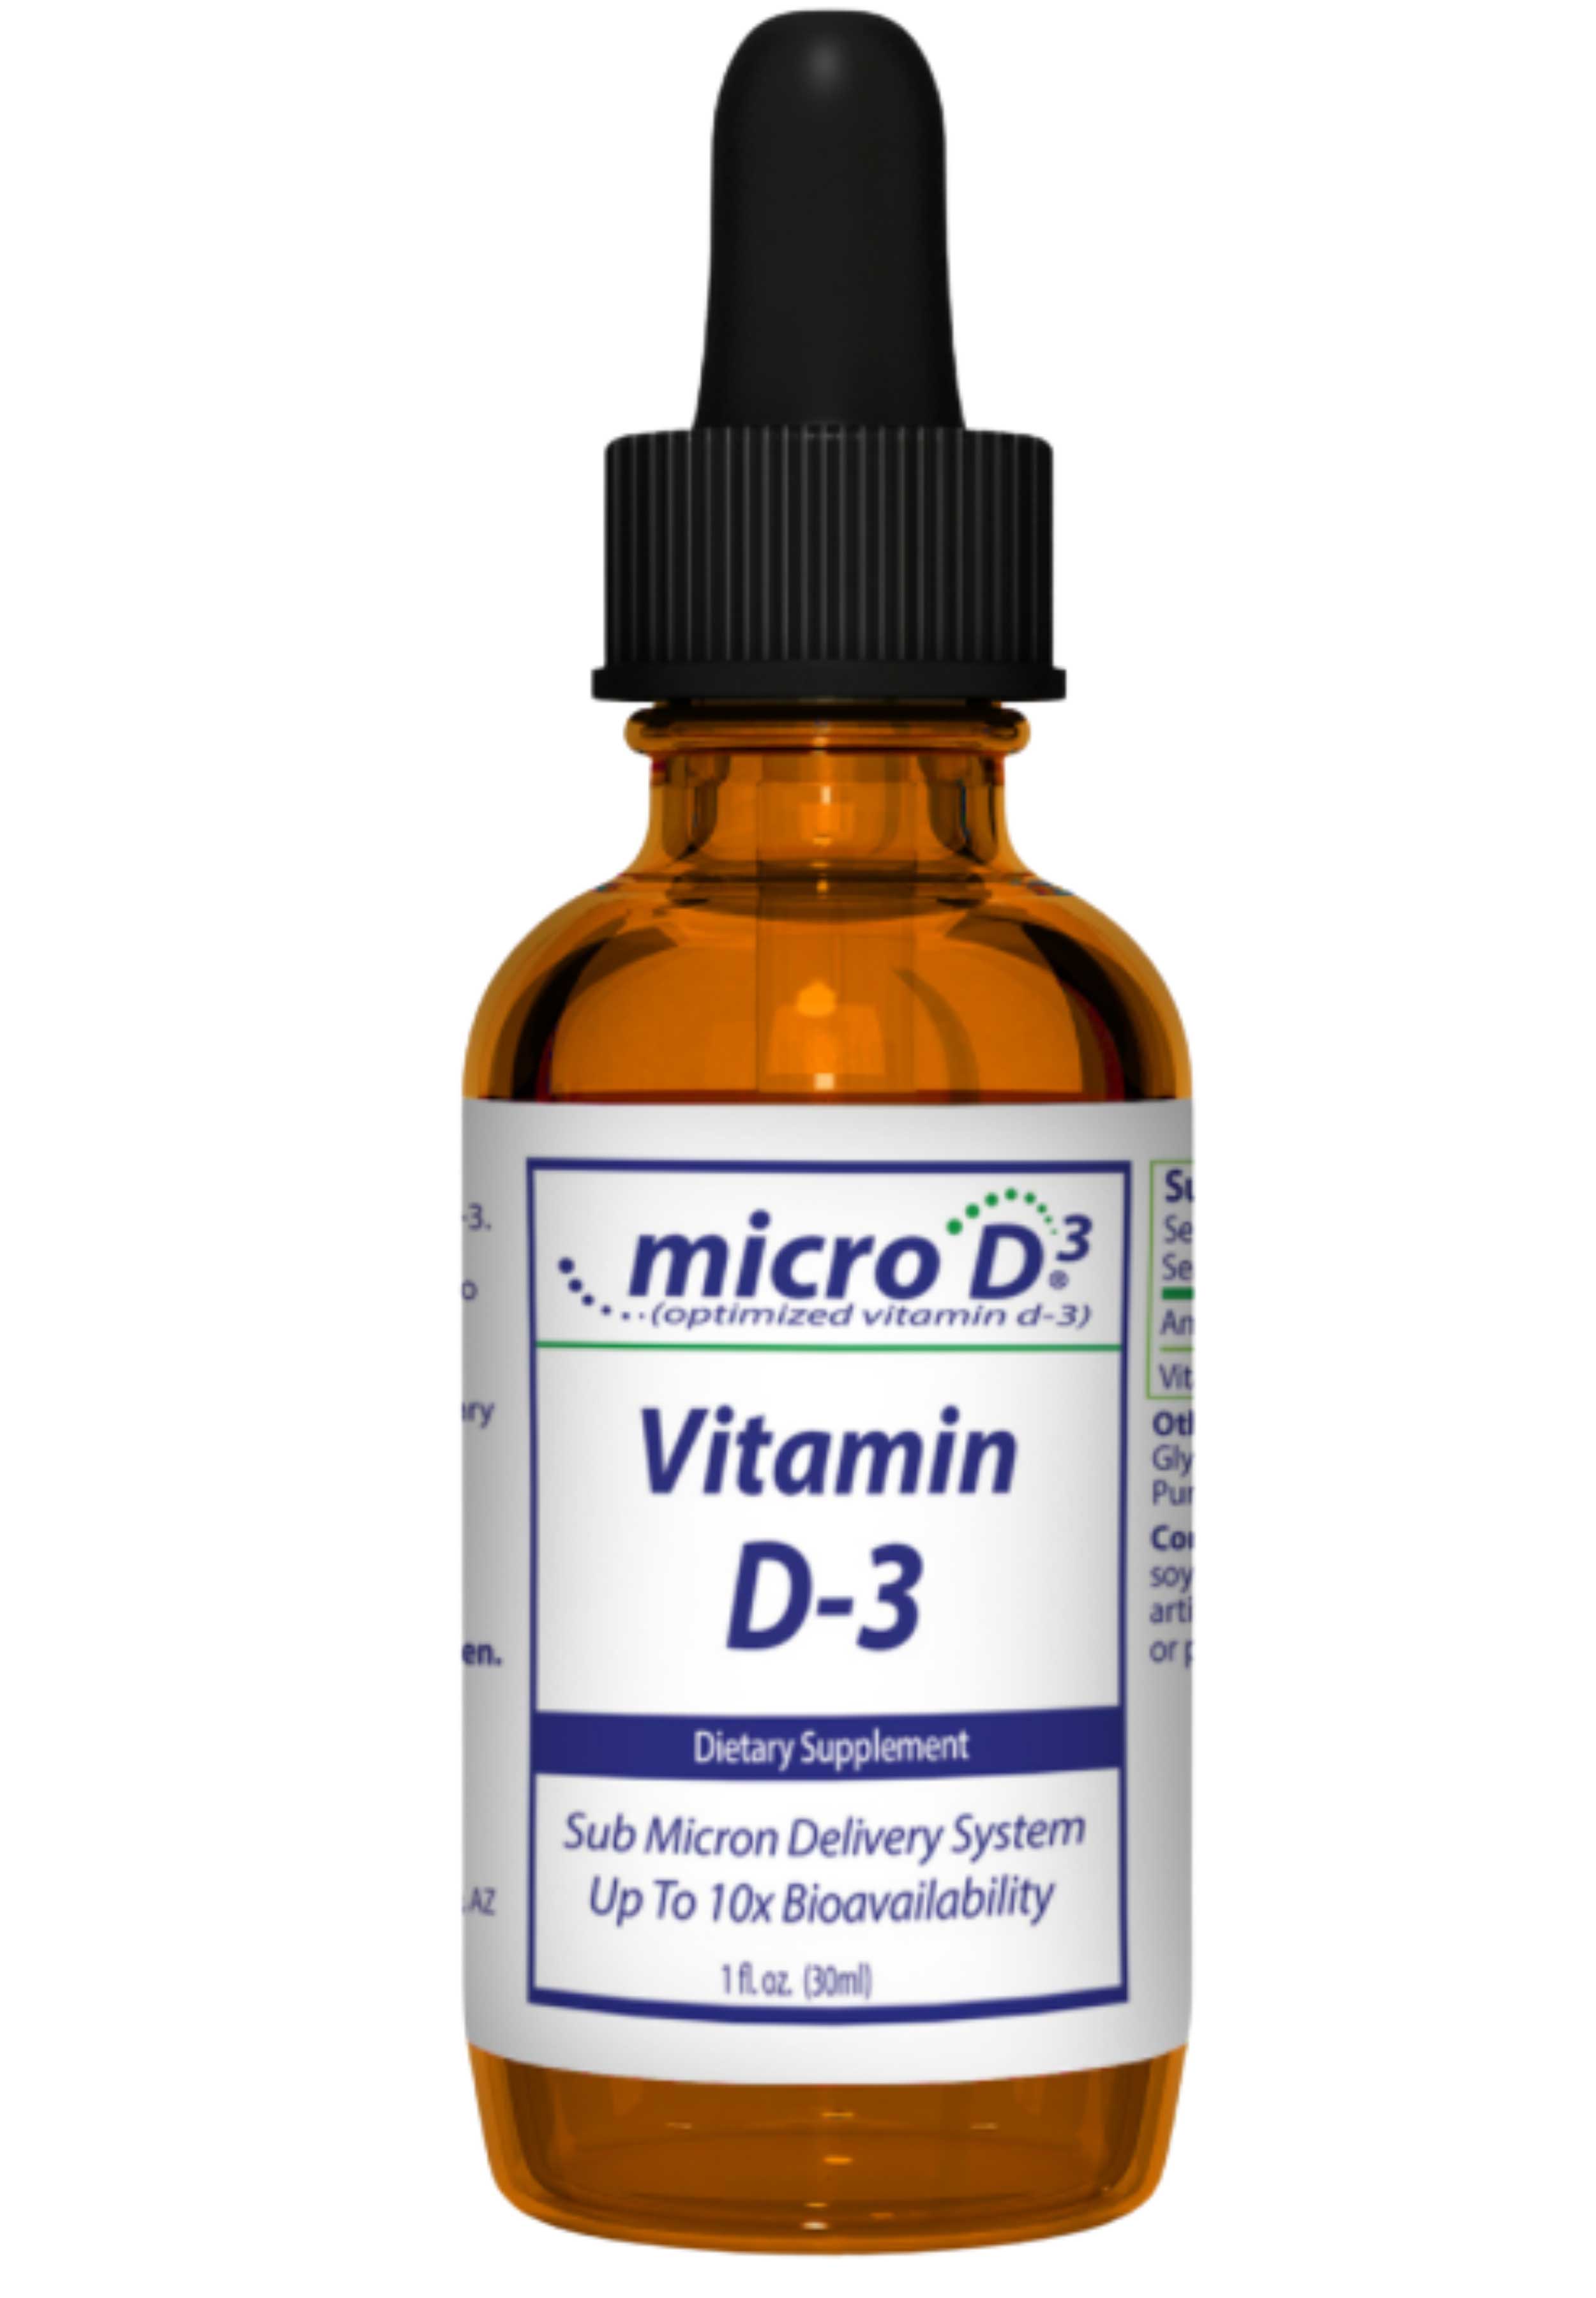 Nutrasal Vitamin D3 with M.E.D.S. (Nano) Technology